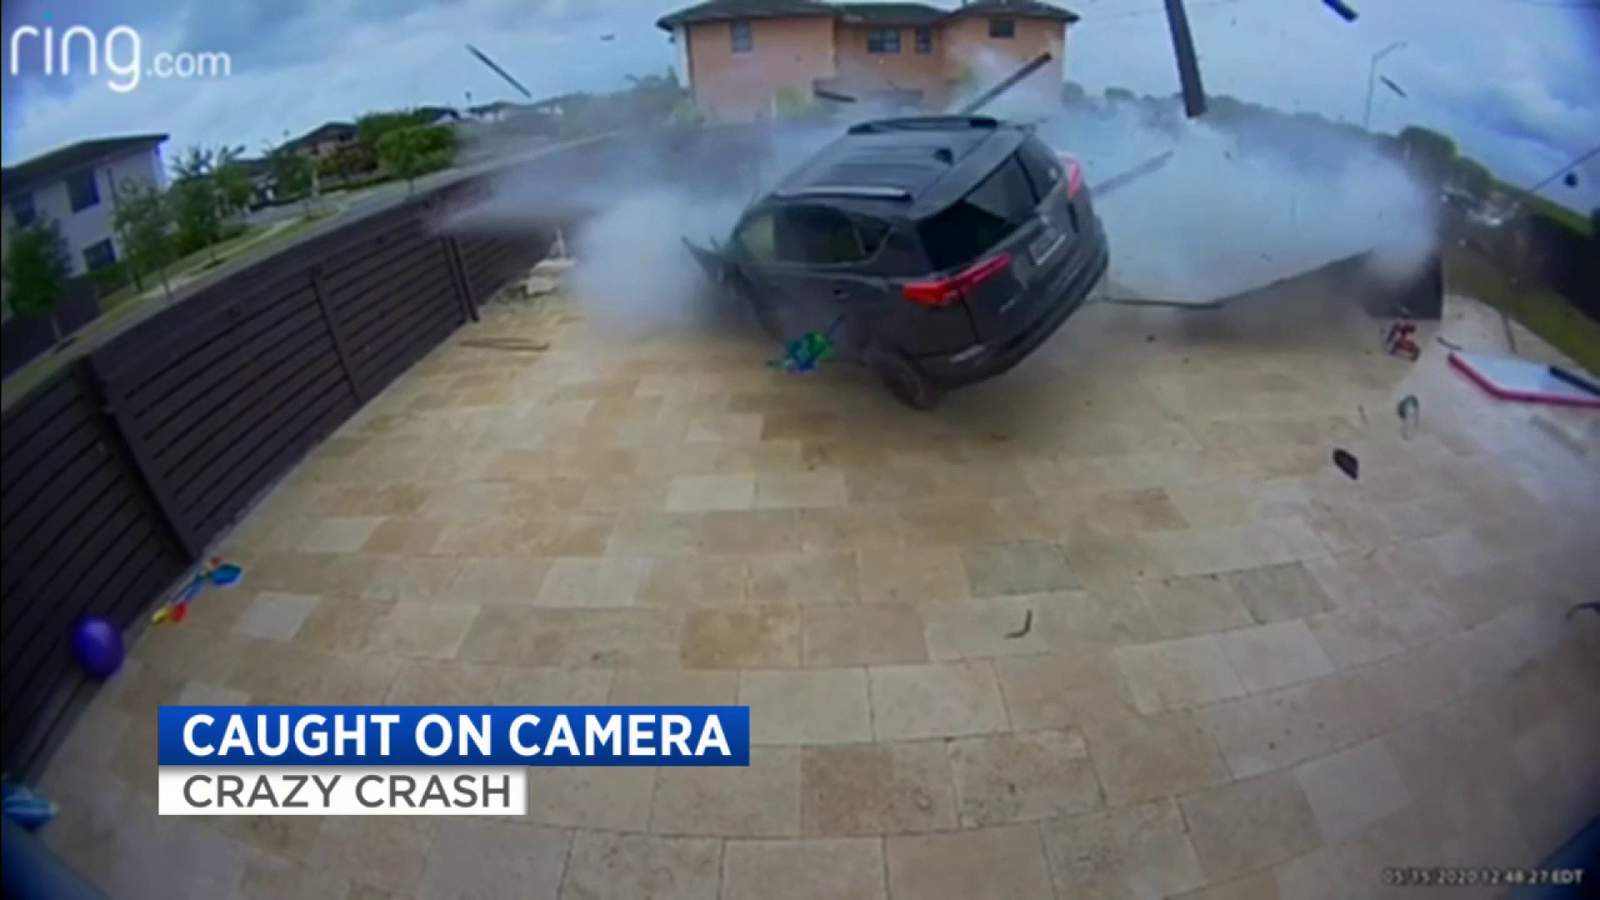 Cloudy day might have saved children’s lives, father says after car flies over pool